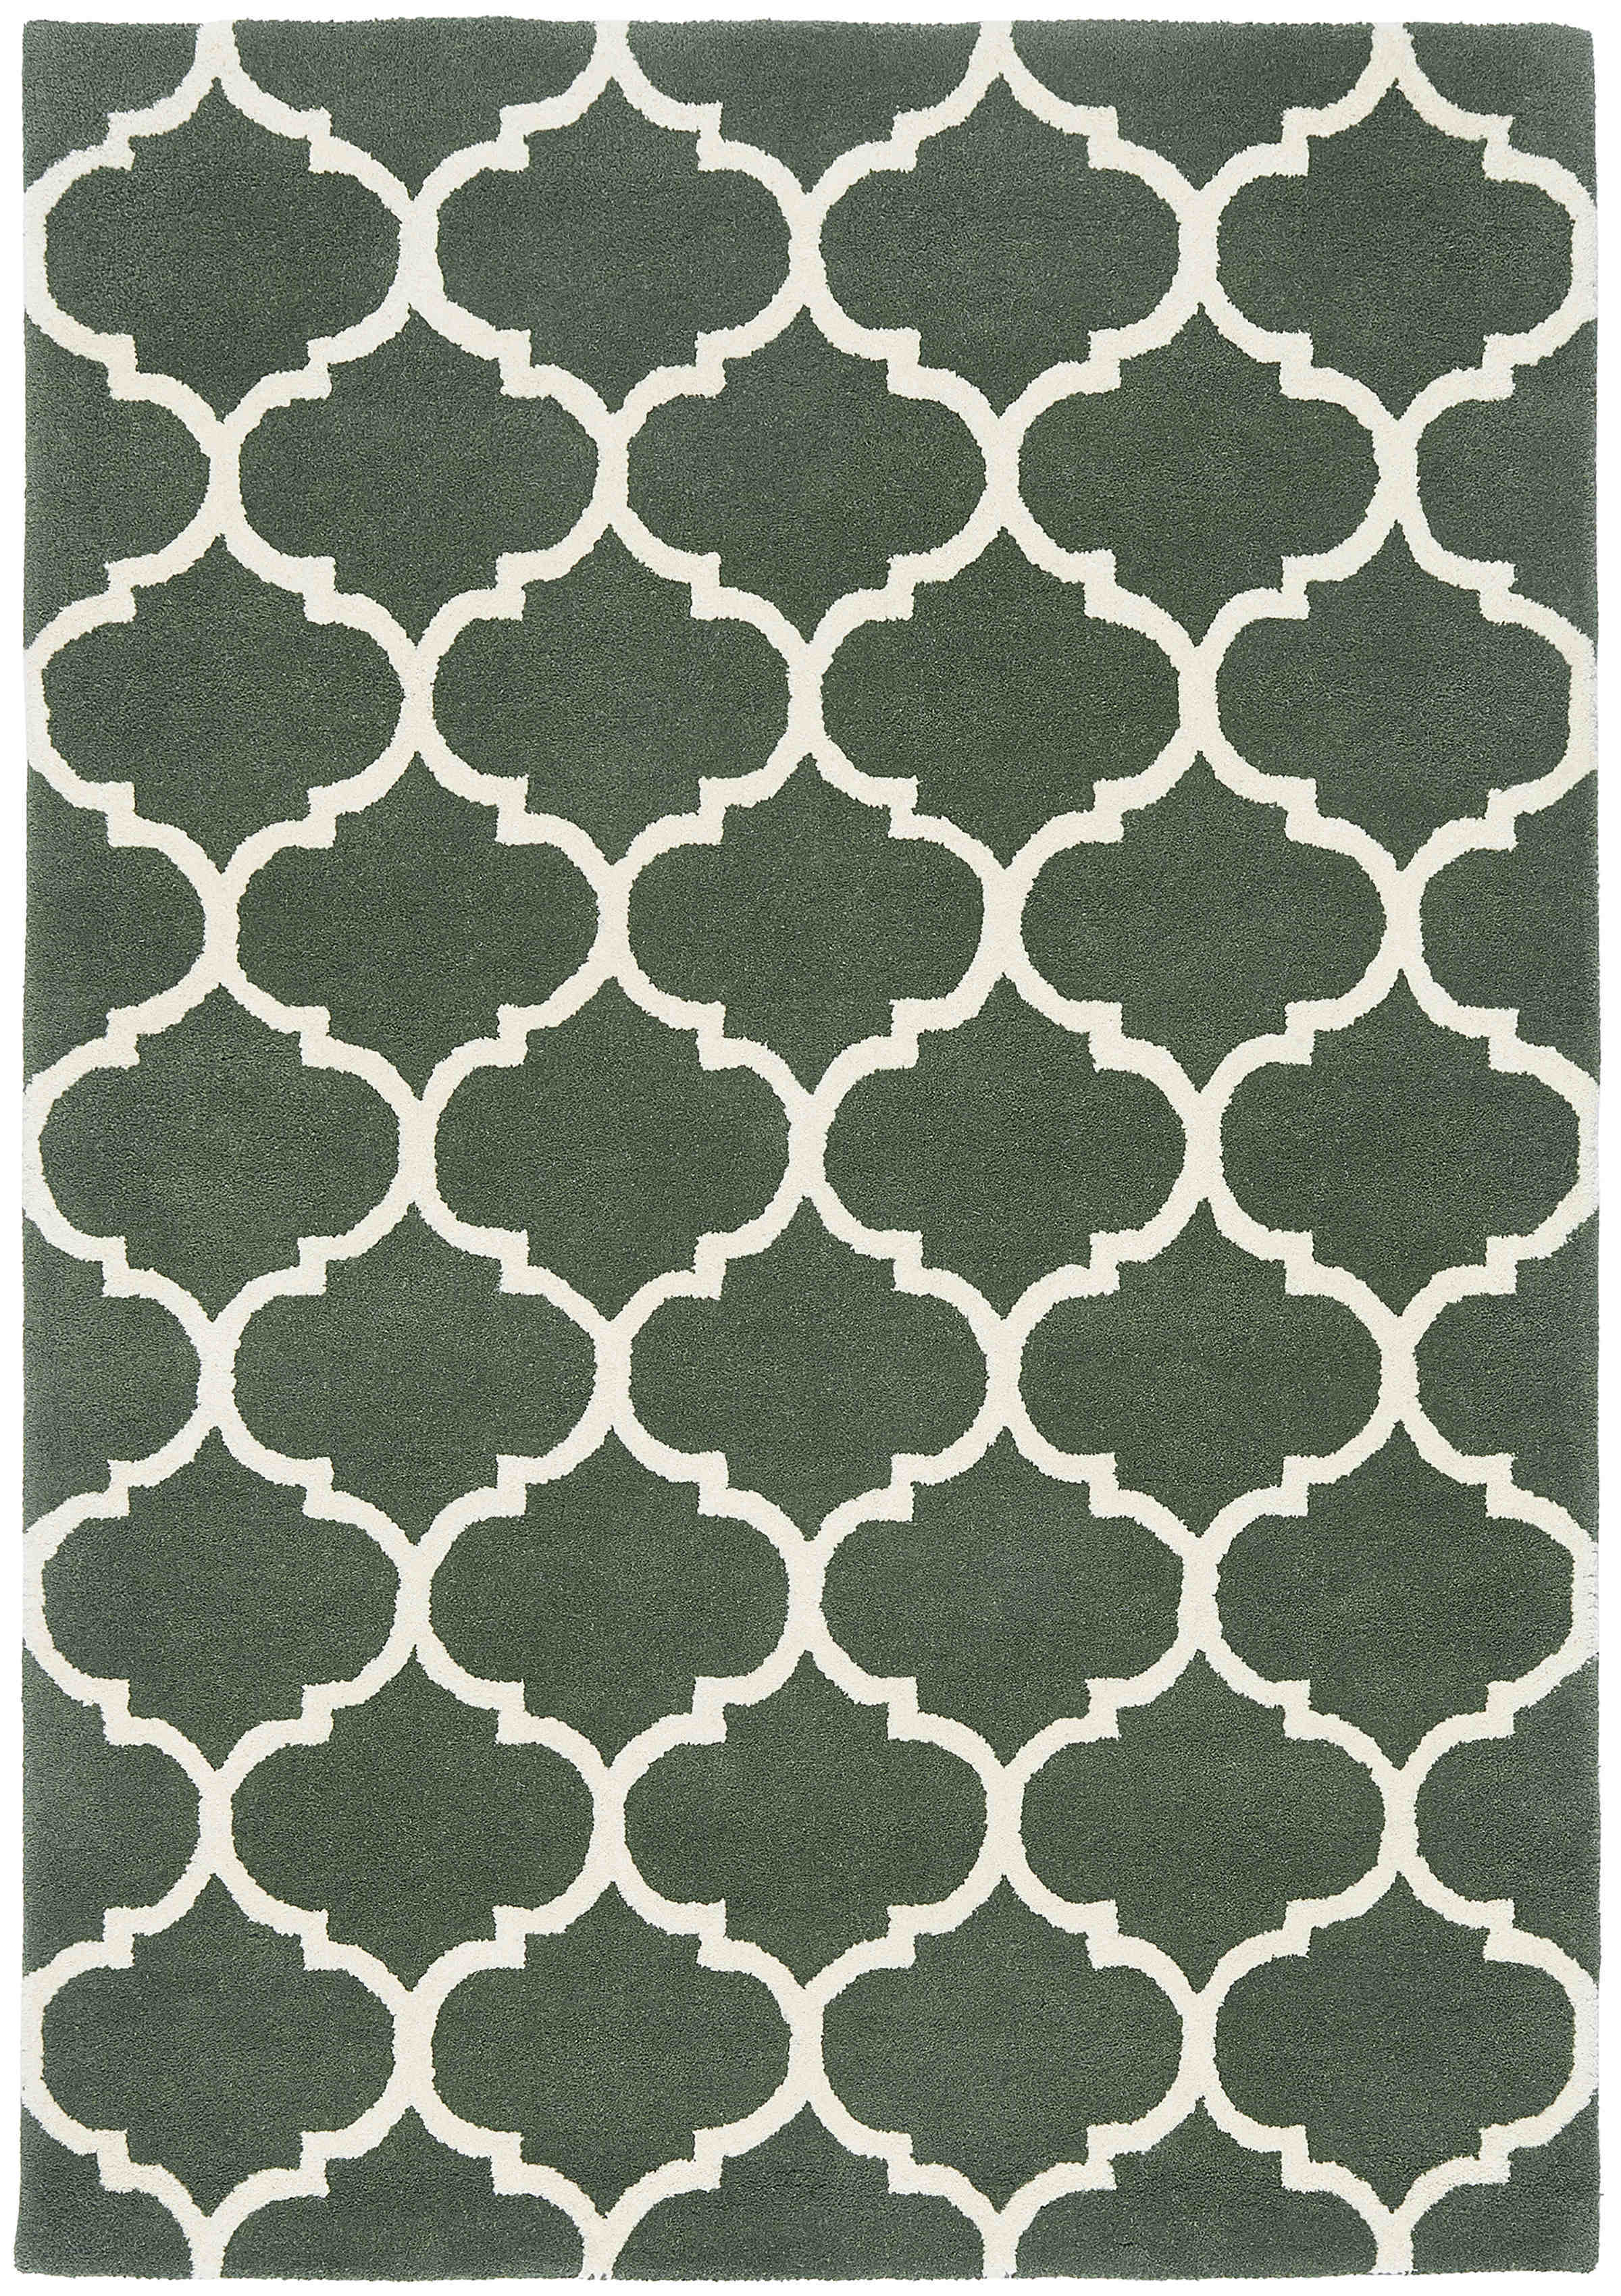 ogee green geometric rug with an ogee pattern